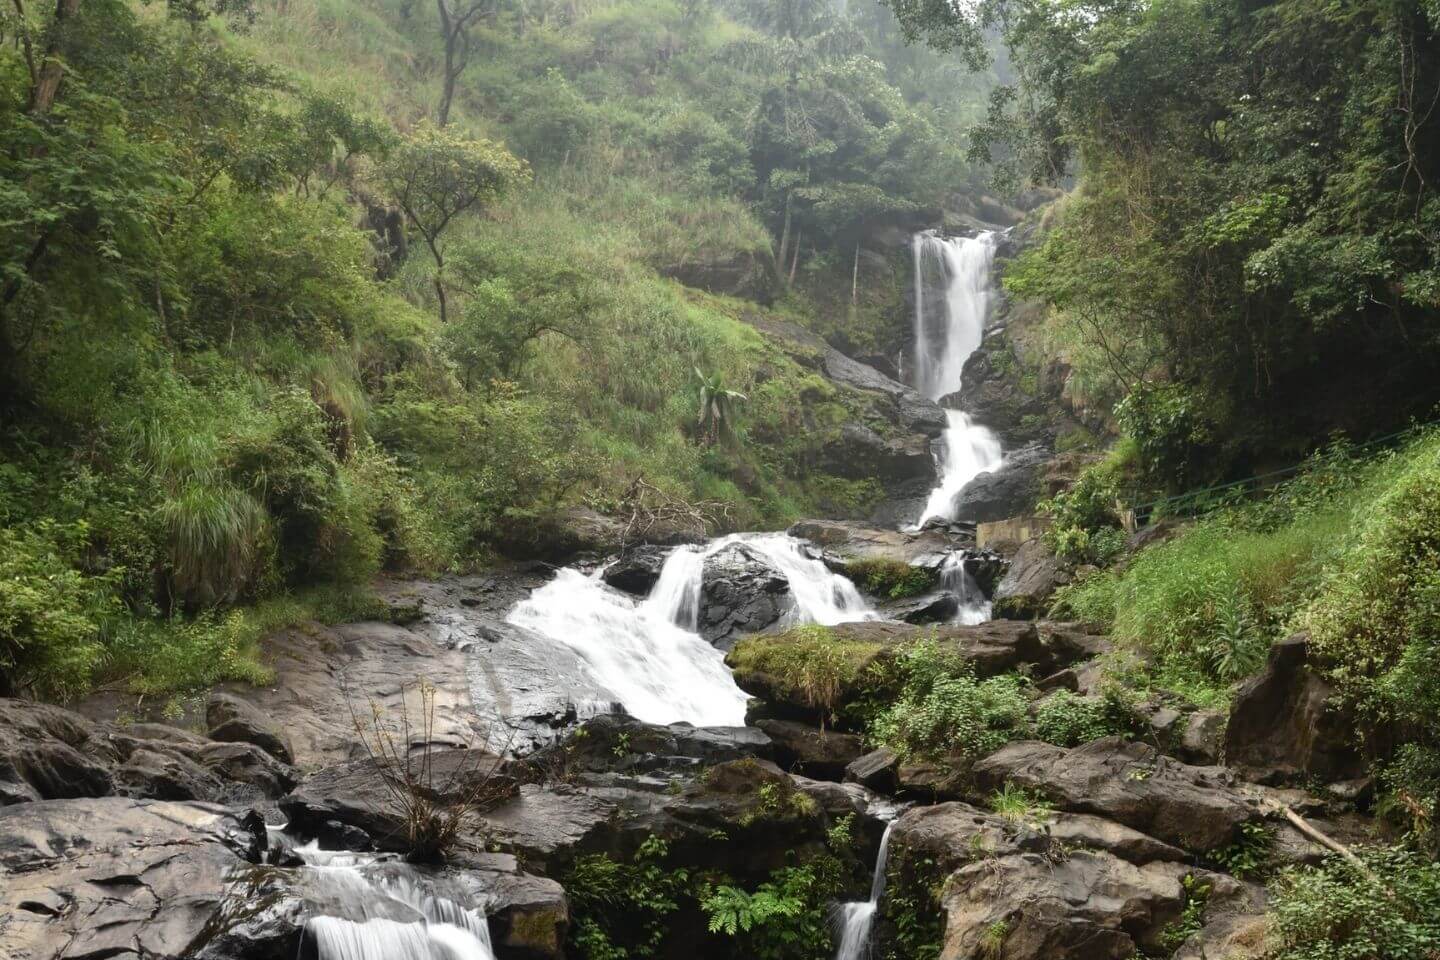 Best Time to Visit Coorg